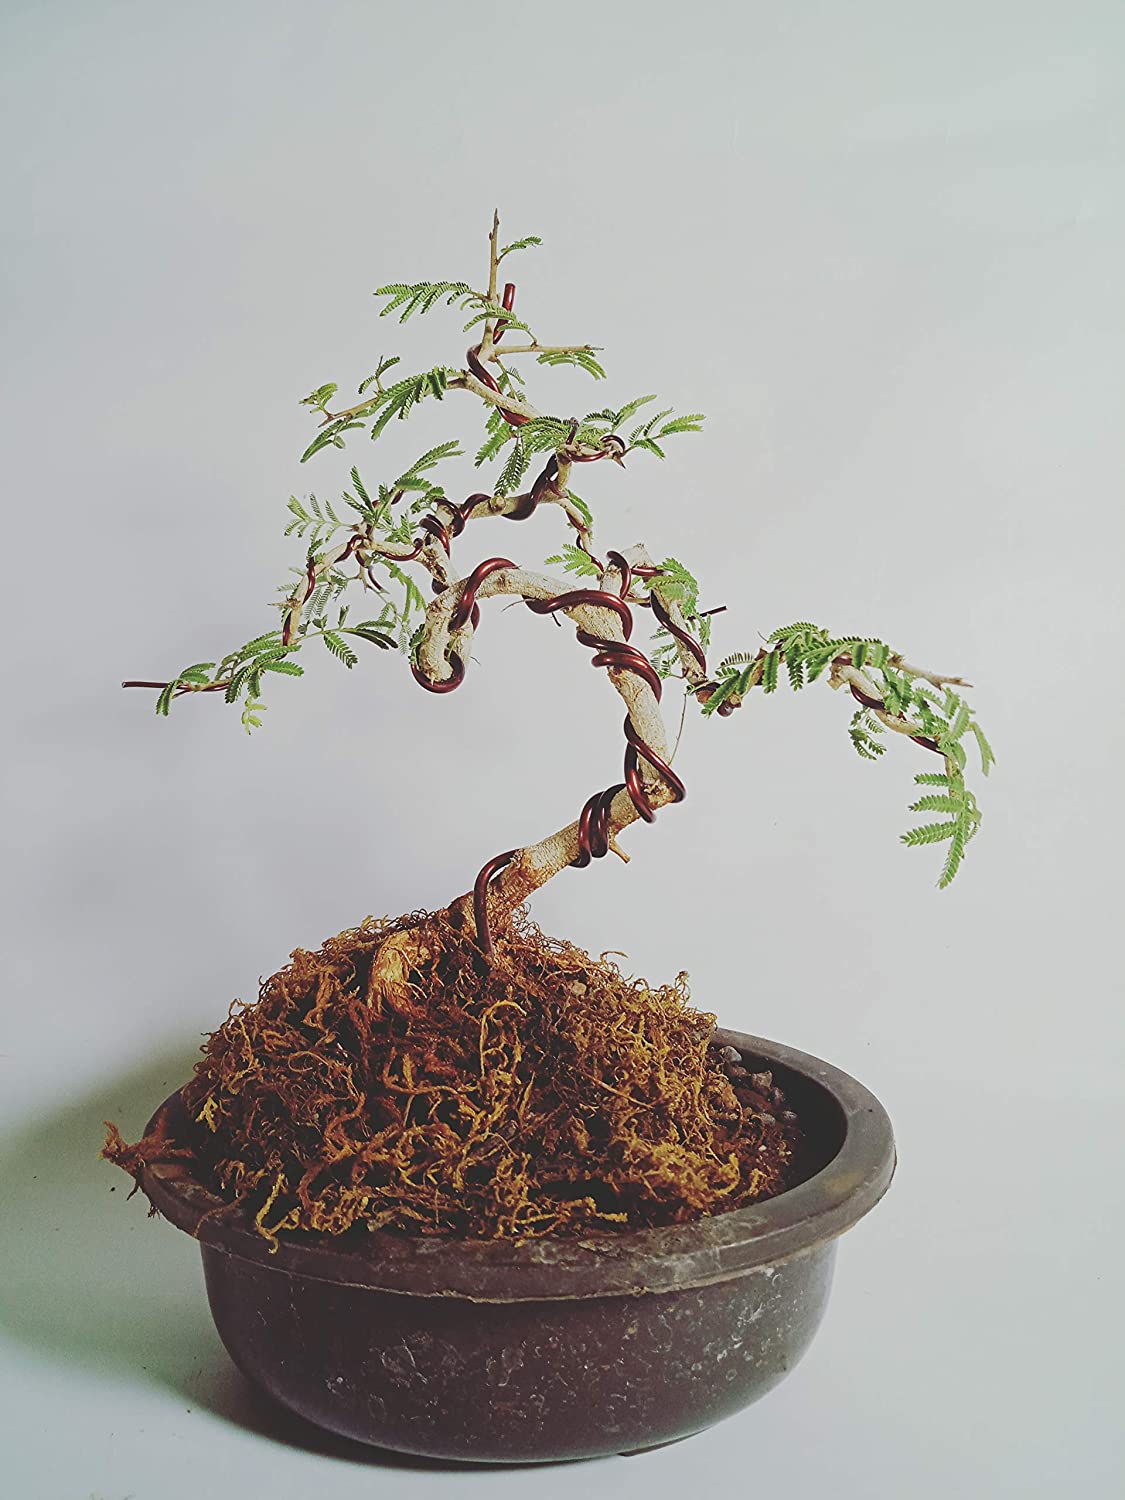 Live Bonsai shami tree Prosopis cineraria 3 years old Live and holy Bonsai shami plant with bonsai pot bring goodluck to your house